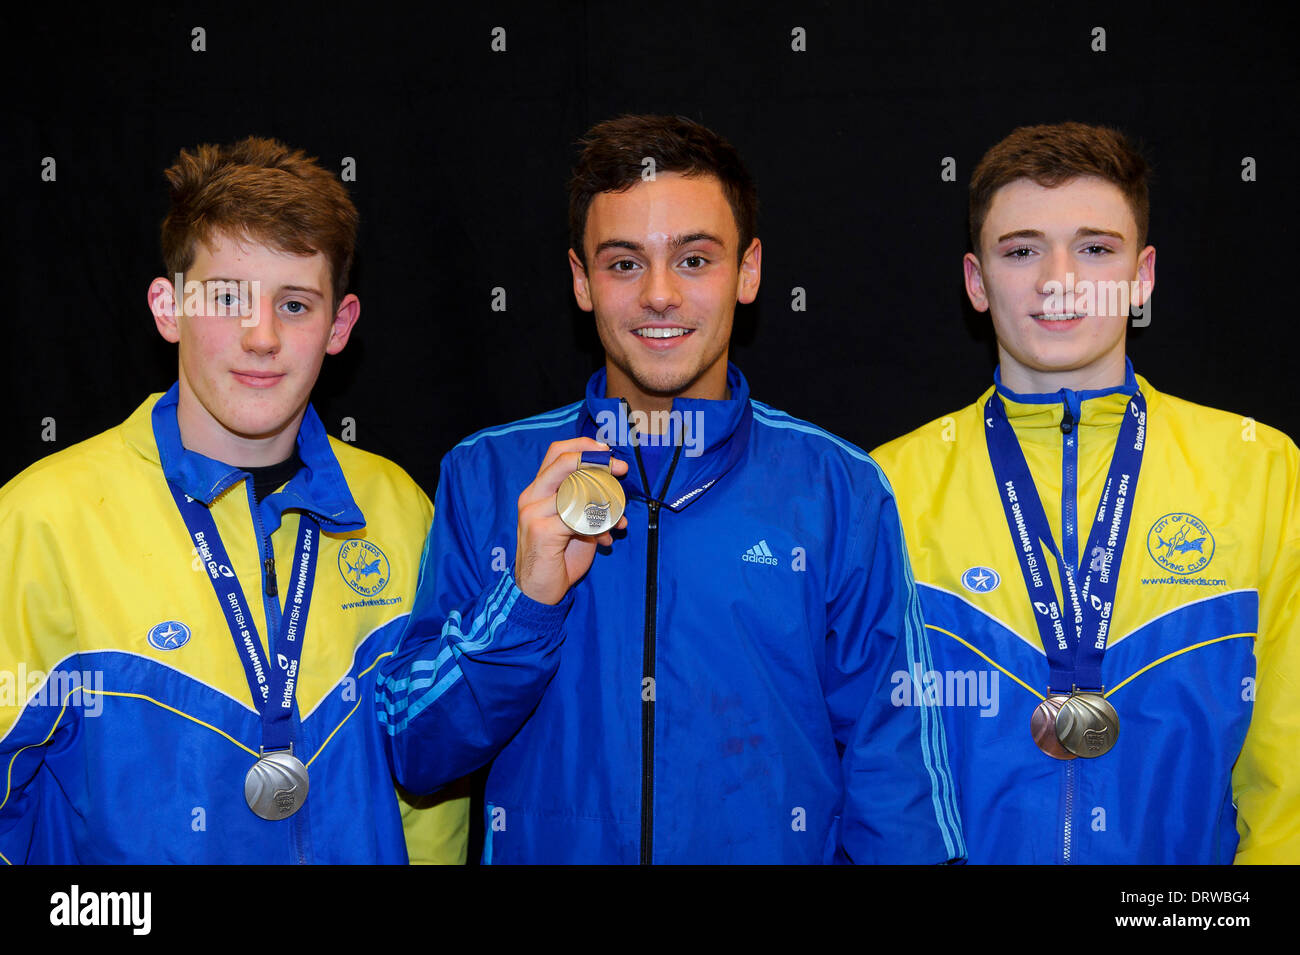 The medallists from the Mens 10m Final, L-R James Denny of City of Leeds Diving Club (Silver), Tom Daley of Plymouth Diving (Gold) and Matty Lee of City of Leeds Diving Club (Bronze), pose - Photo mandatory by-line: Rogan Thomson/JMP - 07966 386802 - 02/02/2014 - SPORT - DIVING - Southend Swimming and Diving Centre, Southend-on-Sea - British Gas Diving National Cup 2014 Day 3. Stock Photo